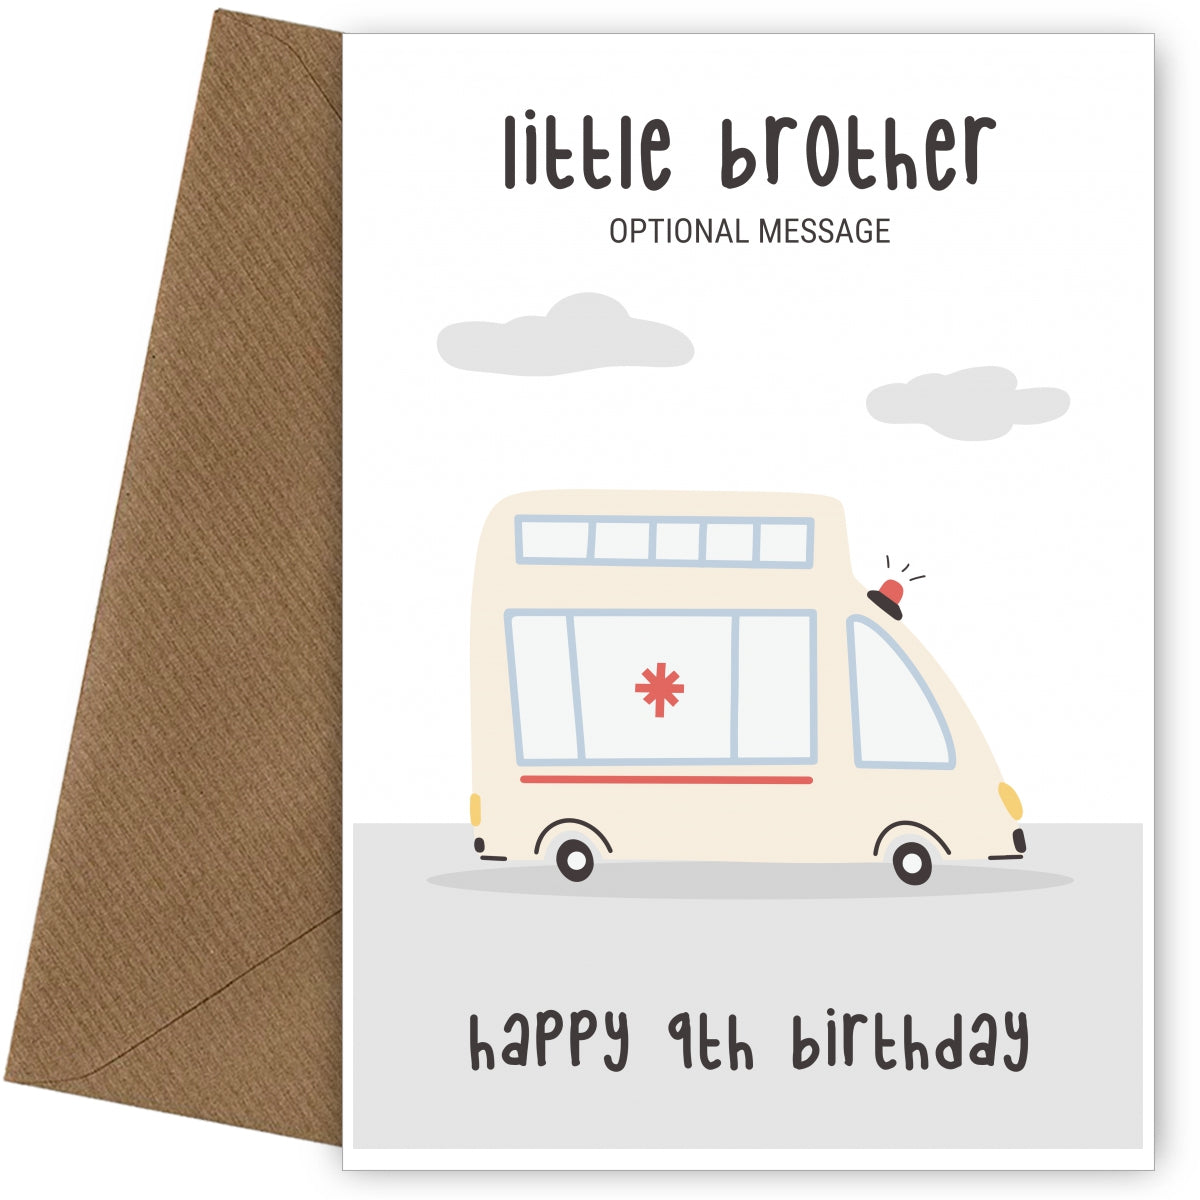 Fun Vehicles 9th Birthday Card for Little Brother - Ambulance